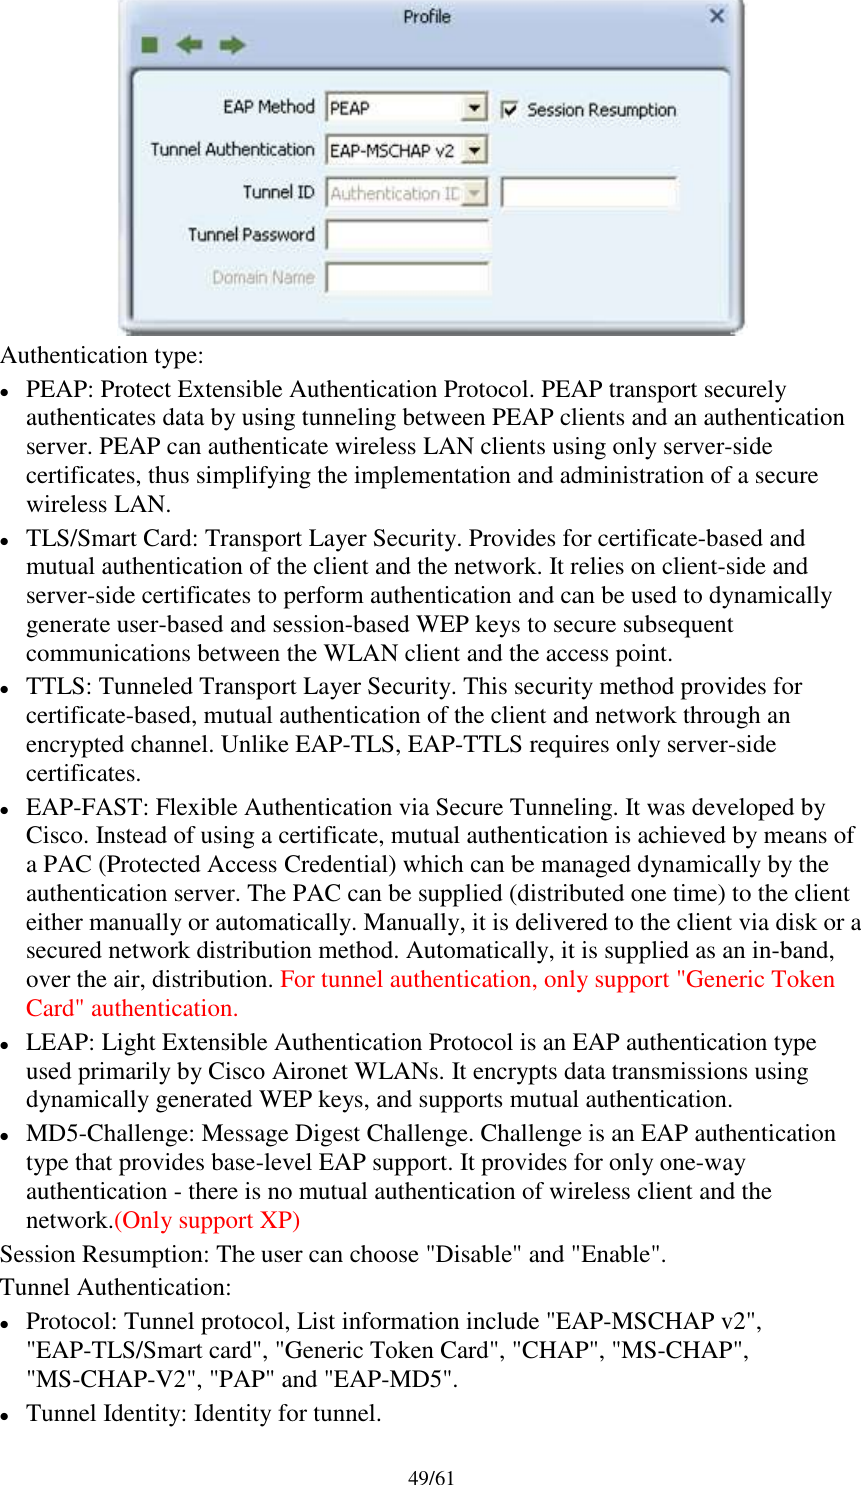 49/61Authentication type:PEAP: Protect Extensible Authentication Protocol. PEAP transport securelyauthenticates data by using tunneling between PEAP clients and an authenticationserver. PEAP can authenticate wireless LAN clients using only server-sidecertificates, thus simplifying the implementation and administration of a securewireless LAN.TLS/Smart Card: Transport Layer Security. Provides for certificate-based andmutual authentication of the client and the network. It relies on client-side andserver-side certificates to perform authentication and can be used to dynamicallygenerate user-based and session-based WEP keys to secure subsequentcommunications between the WLAN client and the access point.TTLS: Tunneled Transport Layer Security. This security method provides forcertificate-based, mutual authentication of the client and network through anencrypted channel. Unlike EAP-TLS, EAP-TTLS requires only server-sidecertificates.EAP-FAST: Flexible Authentication via Secure Tunneling. It was developed byCisco. Instead of using a certificate, mutual authentication is achieved by means ofa PAC (Protected Access Credential) which can be managed dynamically by theauthentication server. The PAC can be supplied (distributed one time) to the clienteither manually or automatically. Manually, it is delivered to the client via disk or asecured network distribution method. Automatically, it is supplied as an in-band,over the air, distribution. For tunnel authentication, only support &quot;Generic TokenCard&quot; authentication.LEAP: Light Extensible Authentication Protocol is an EAP authentication typeused primarily by Cisco Aironet WLANs. It encrypts data transmissions usingdynamically generated WEP keys, and supports mutual authentication.MD5-Challenge: Message Digest Challenge. Challenge is an EAP authenticationtype that provides base-level EAP support. It provides for only one-wayauthentication - there is no mutual authentication of wireless client and thenetwork.(Only support XP)Session Resumption: The user can choose &quot;Disable&quot; and &quot;Enable&quot;.Tunnel Authentication:Protocol: Tunnel protocol, List information include &quot;EAP-MSCHAP v2&quot;,&quot;EAP-TLS/Smart card&quot;, &quot;Generic Token Card&quot;, &quot;CHAP&quot;, &quot;MS-CHAP&quot;,&quot;MS-CHAP-V2&quot;, &quot;PAP&quot; and &quot;EAP-MD5&quot;.Tunnel Identity: Identity for tunnel.